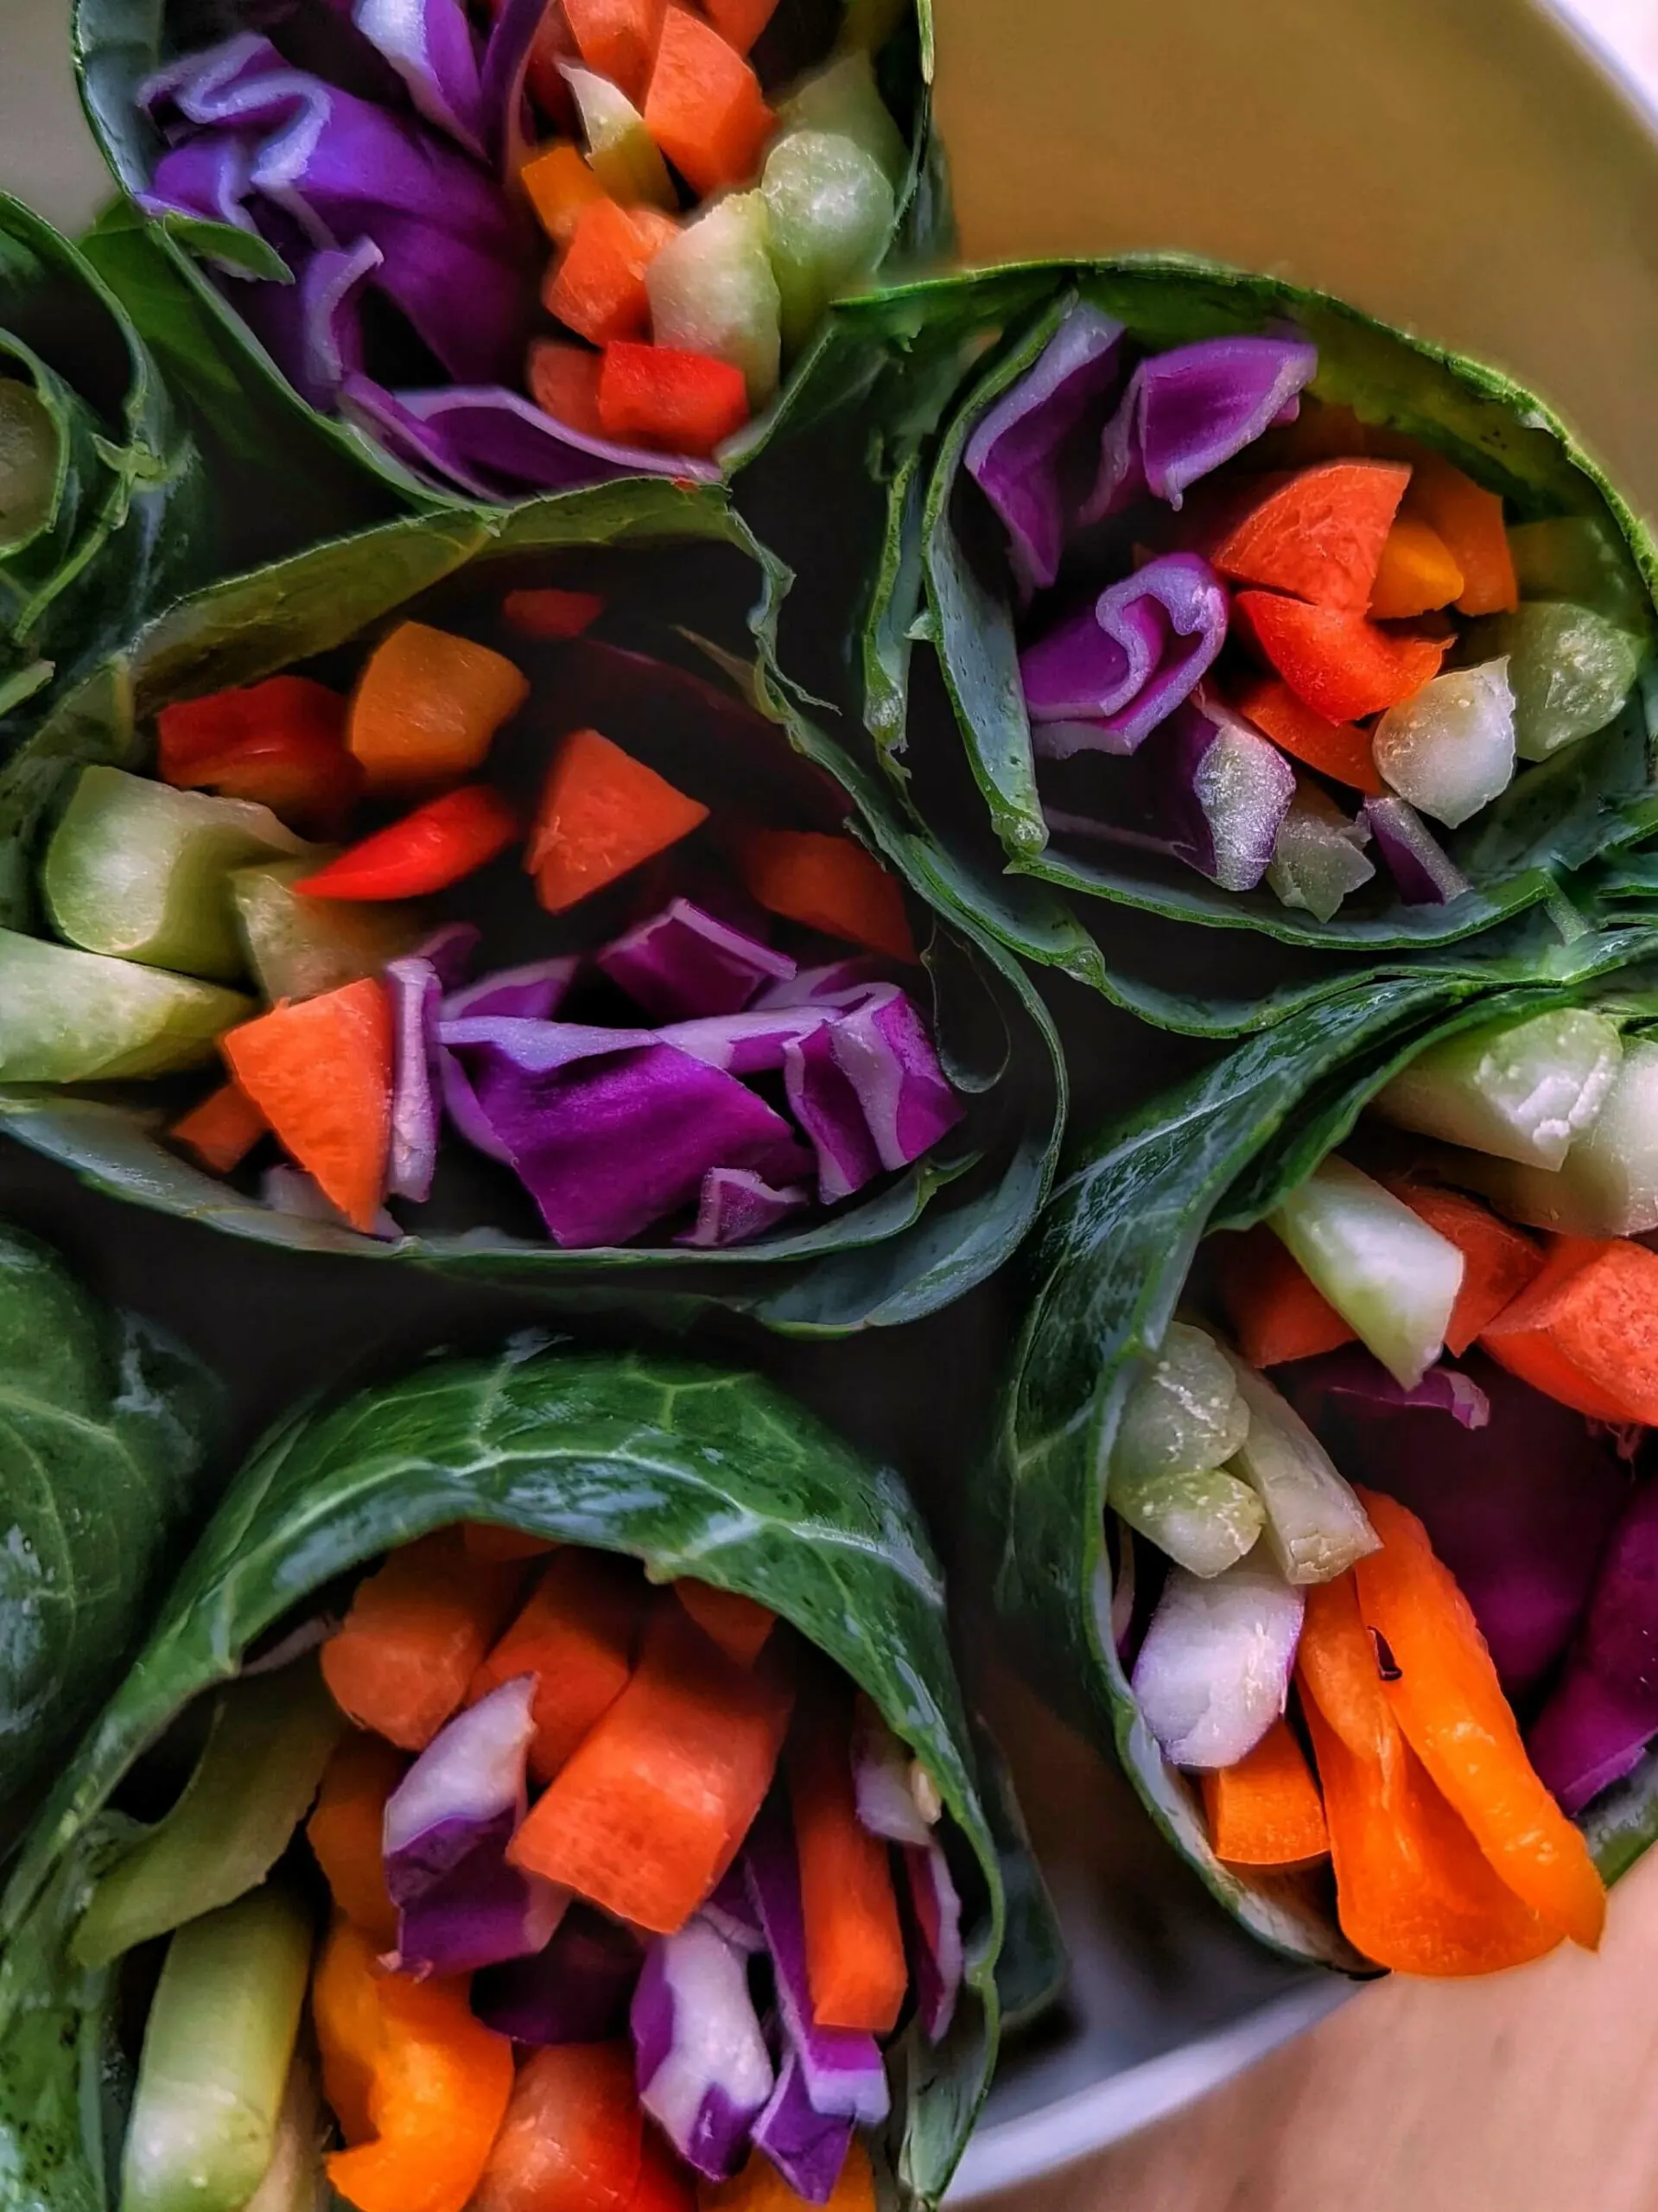 The inside of five rainbow wraps showing the rainbow of vegetables.